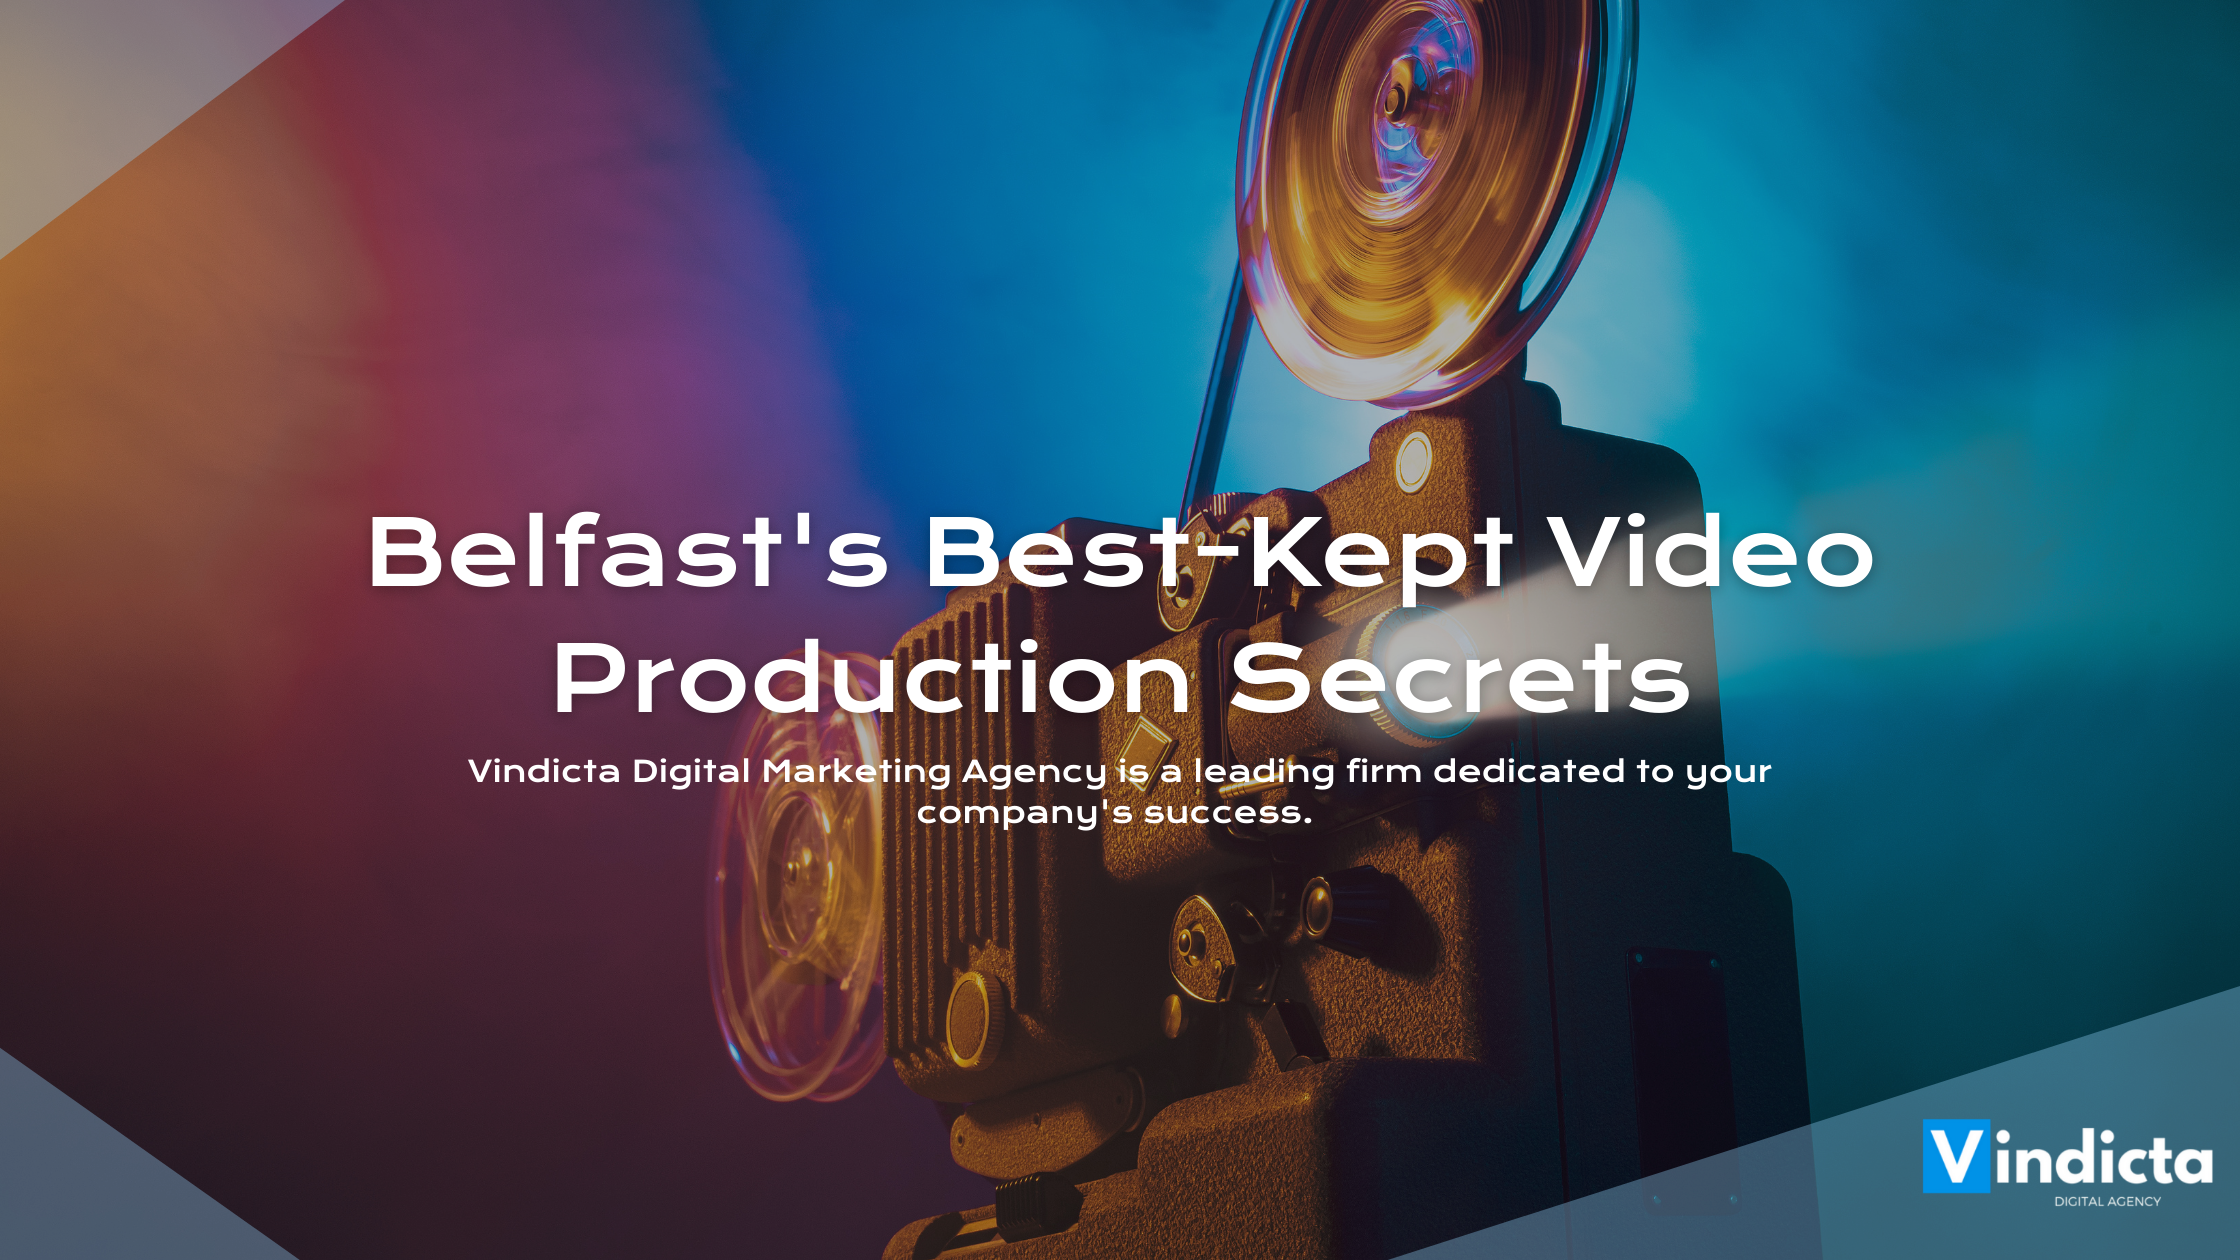 Belfast video production is a powerful tool for businesses to connect with their audience and tell compelling stories.